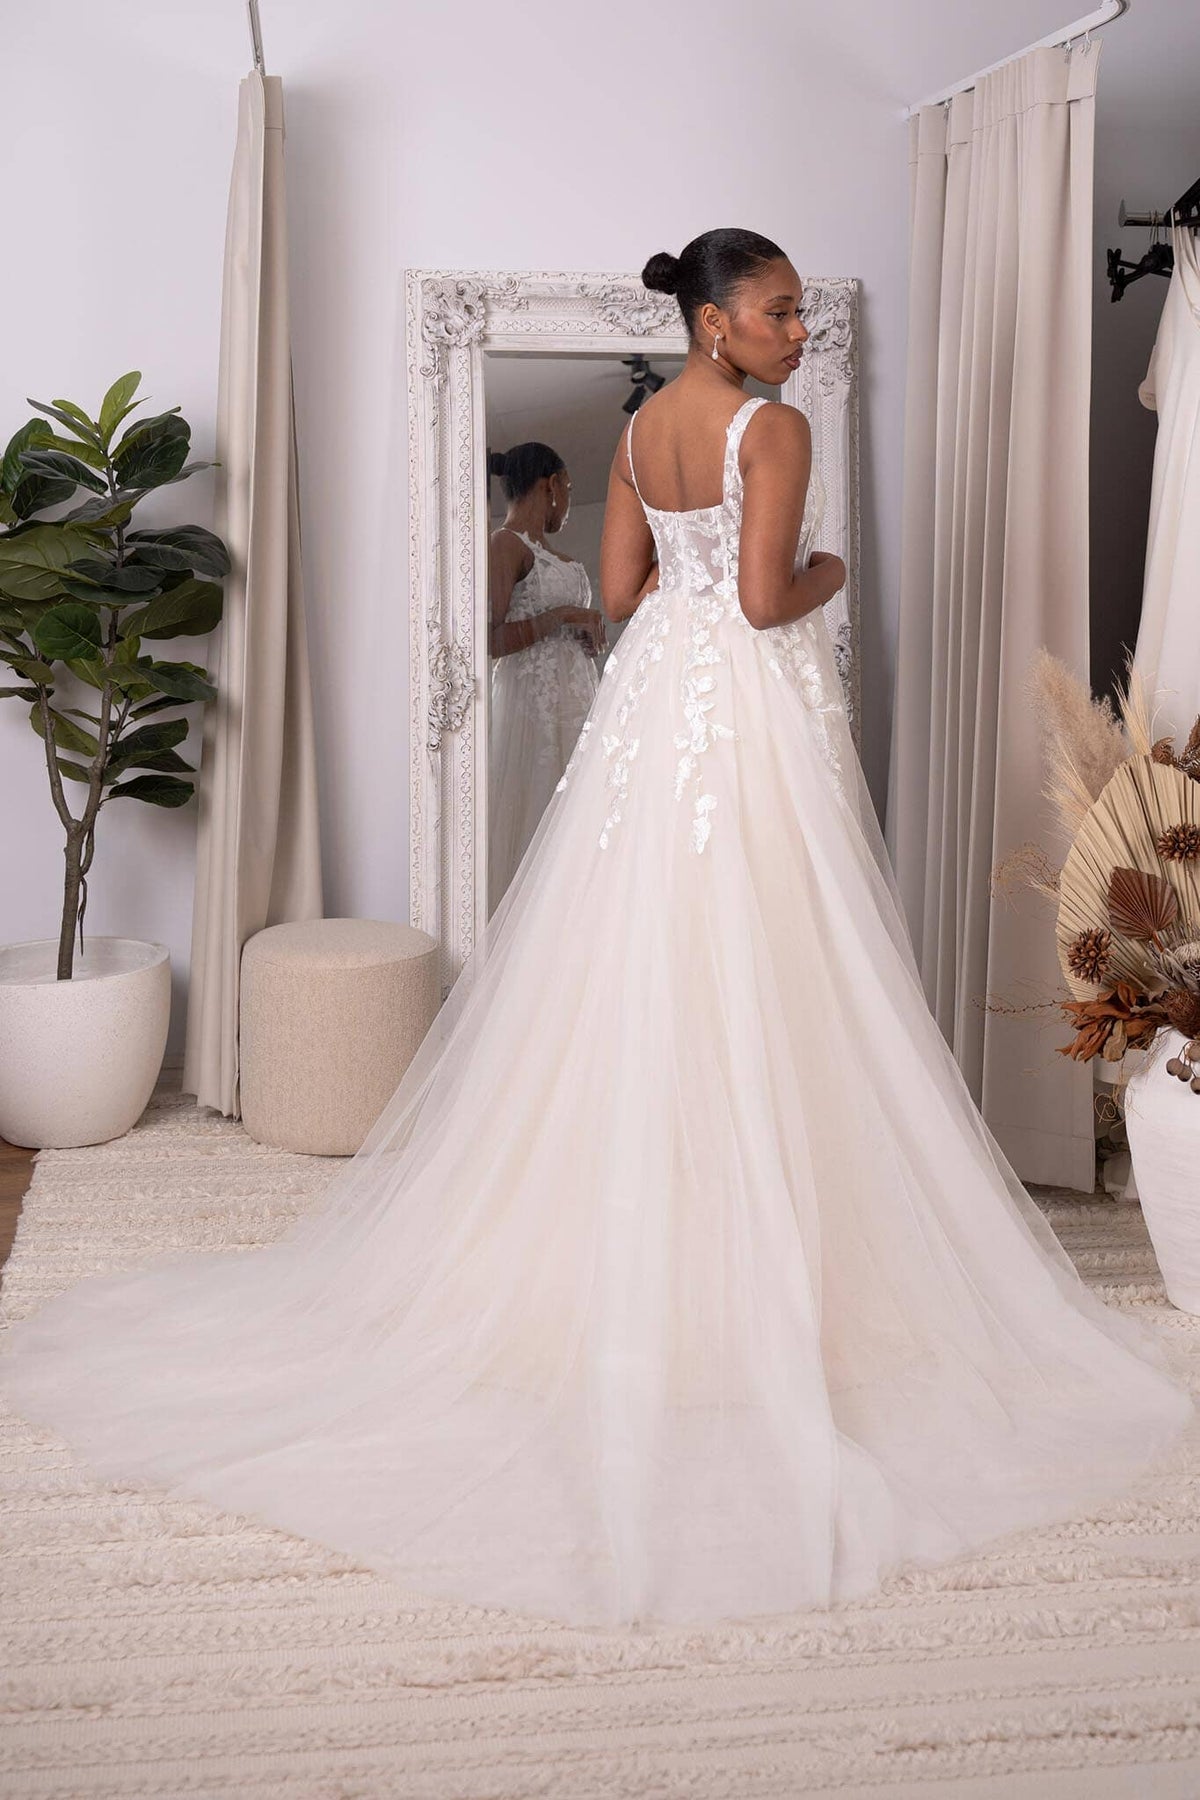 Square Open Back Design of Ivory Off-White Square Neck A-line Lace Wedding Gown with Floral Lace Motifs Embellished on Layered Tulle, Trendy Exposed Bone Bodice, Voluminous Full A-line Skirt and Flowing Sweep Train